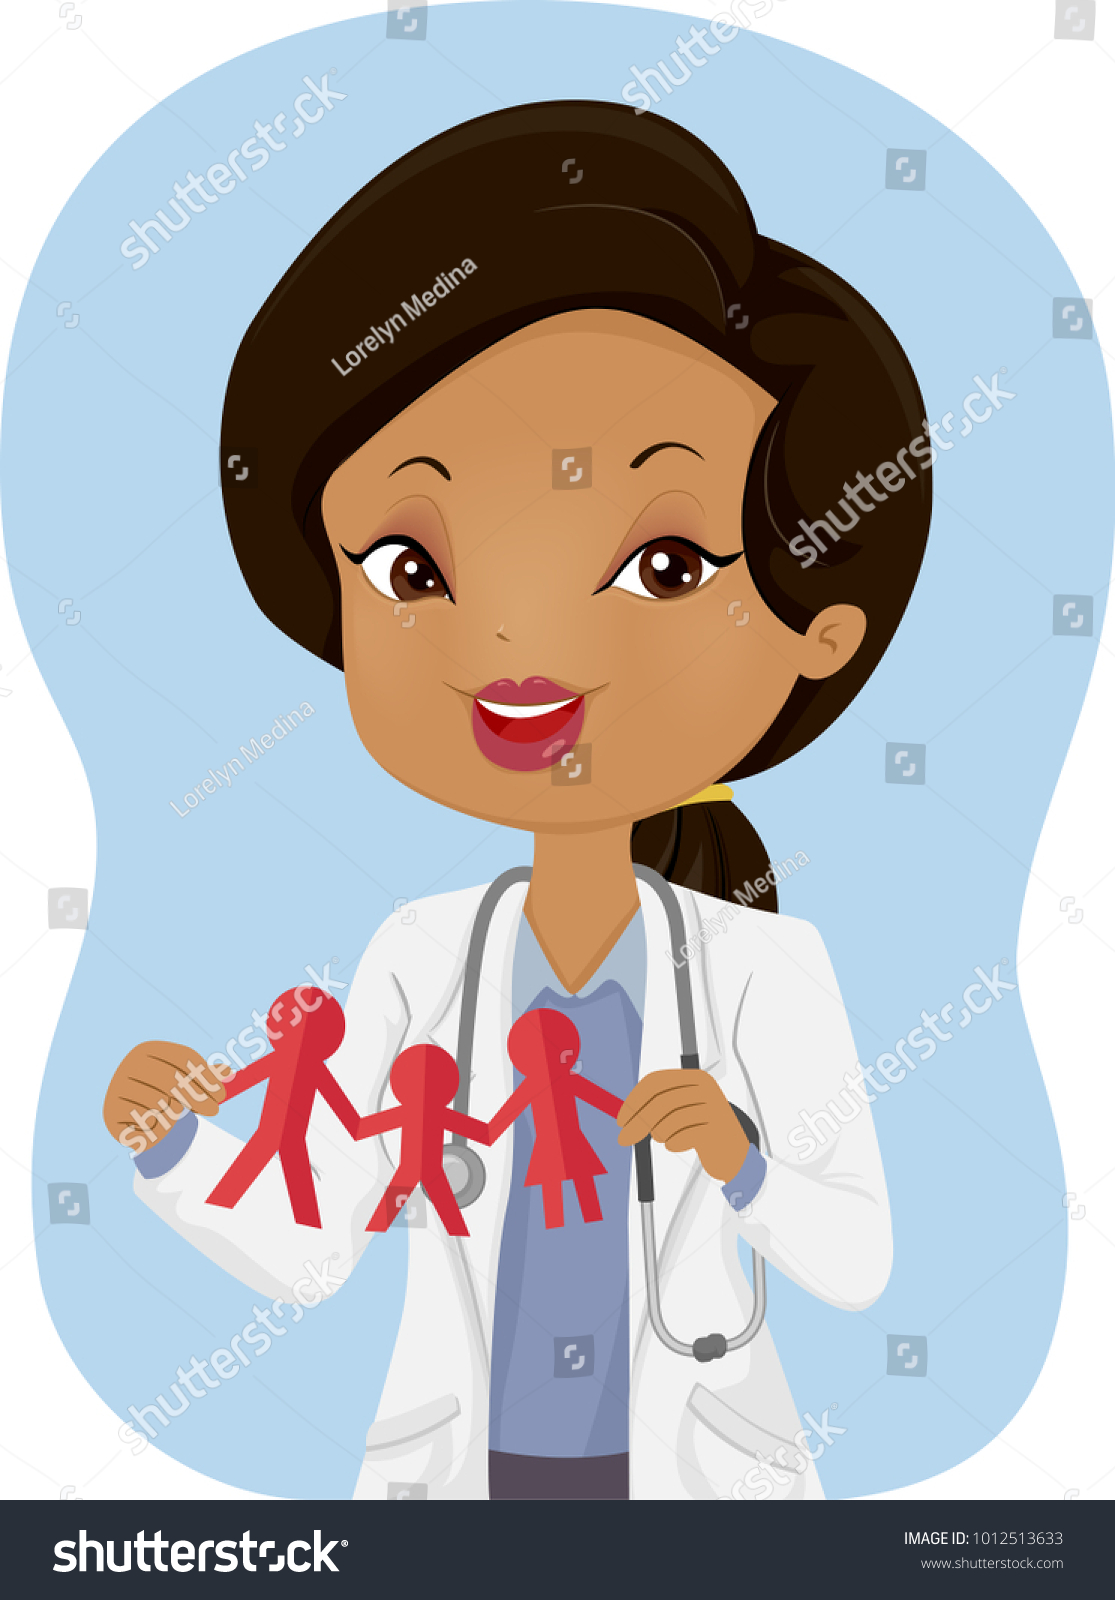 Illustration of a Girl Doctor Wearing White Gown and Stethoscope Holding Paper Family Cutout for Family Planning